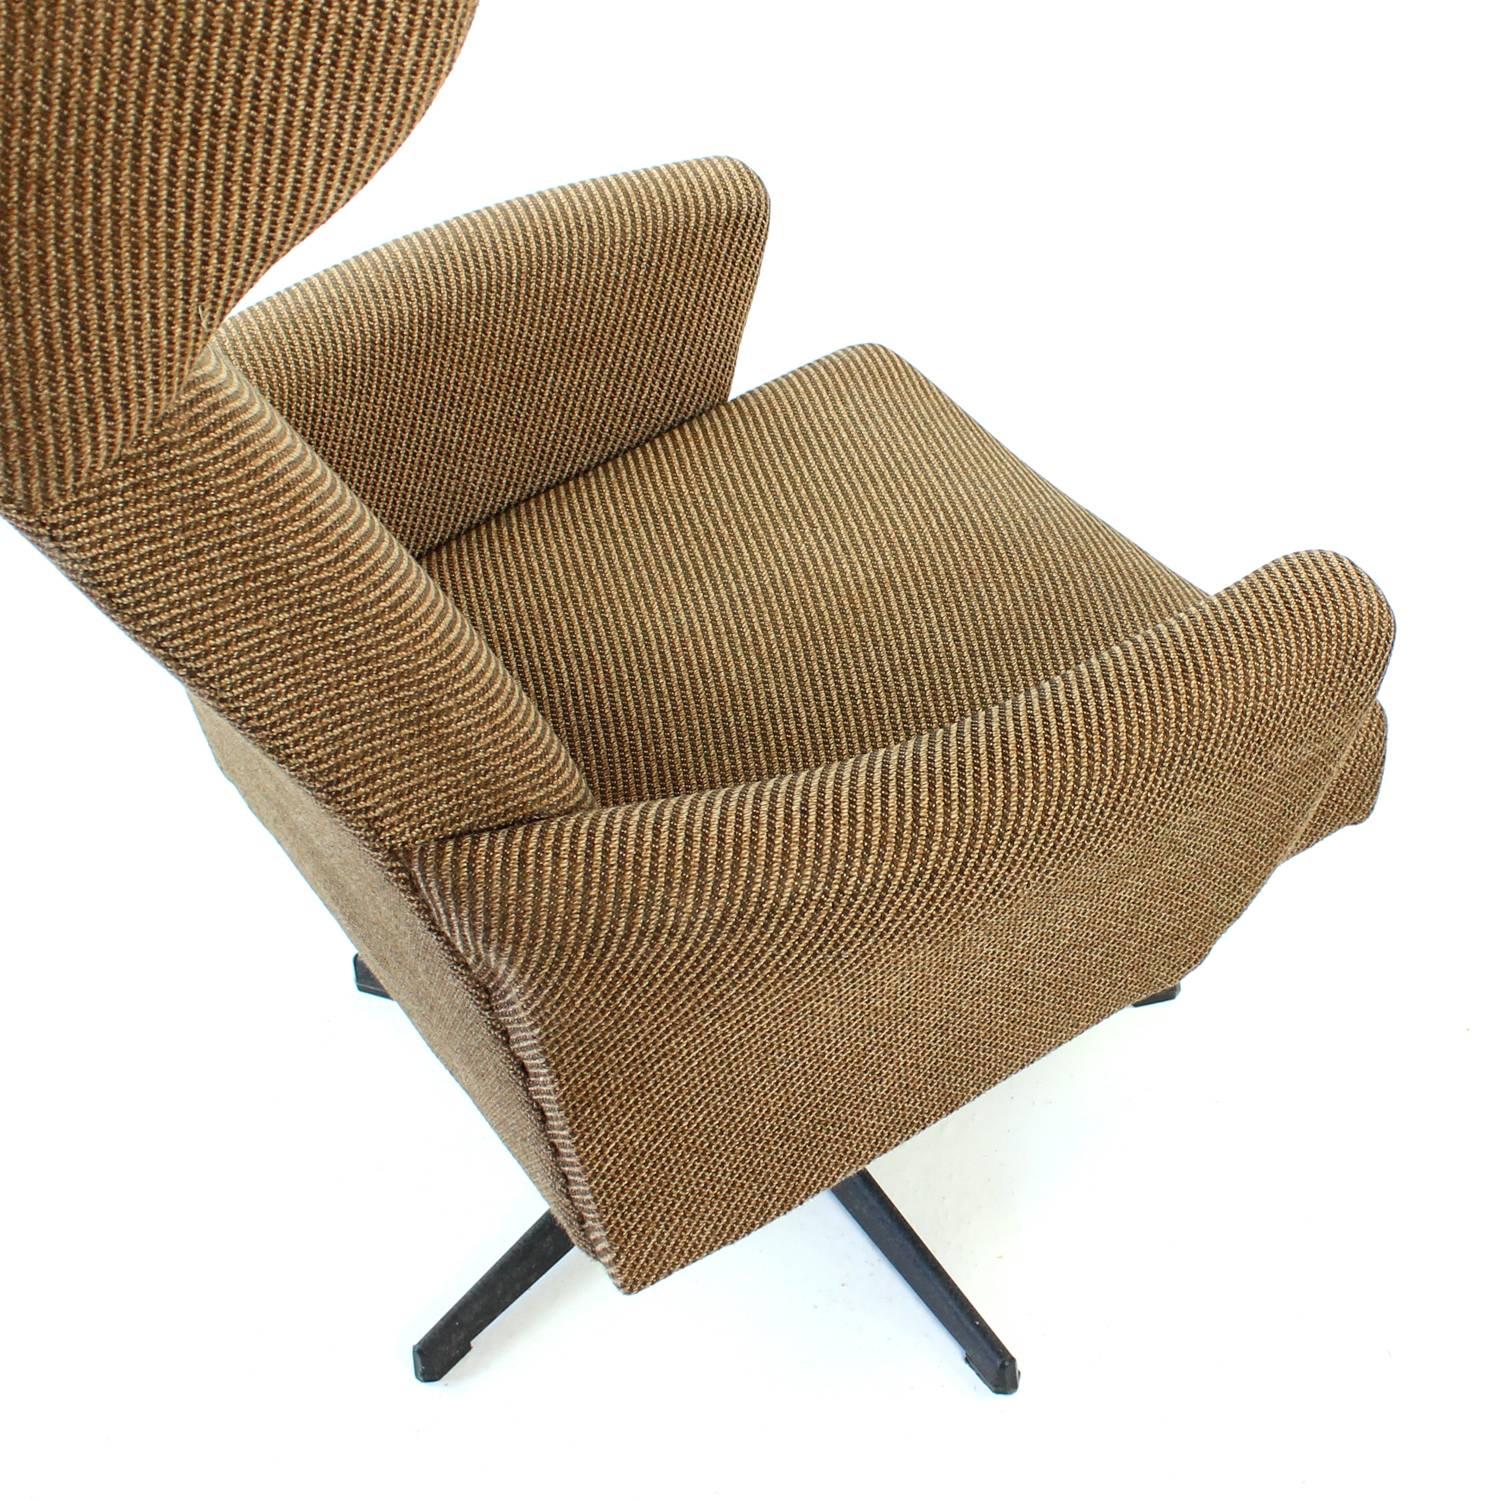 1970s Swivel Wing Chair in Original Brown Fabric, Czechoslovakia For Sale 2